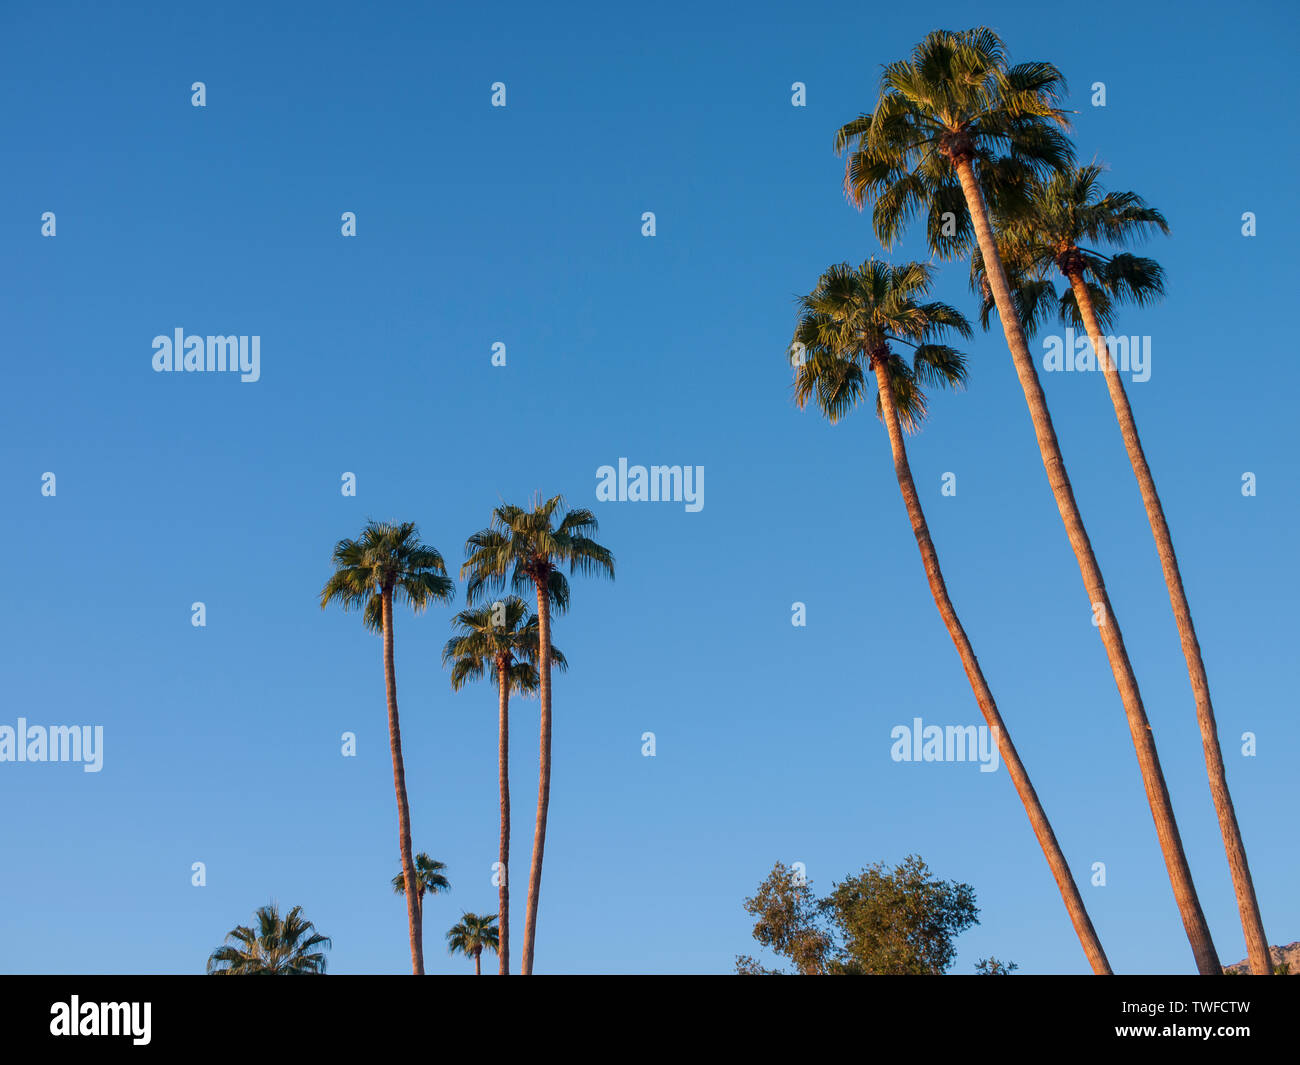 Tall palm trees in Palm Springs set against a deep blue sky. Stock Photo